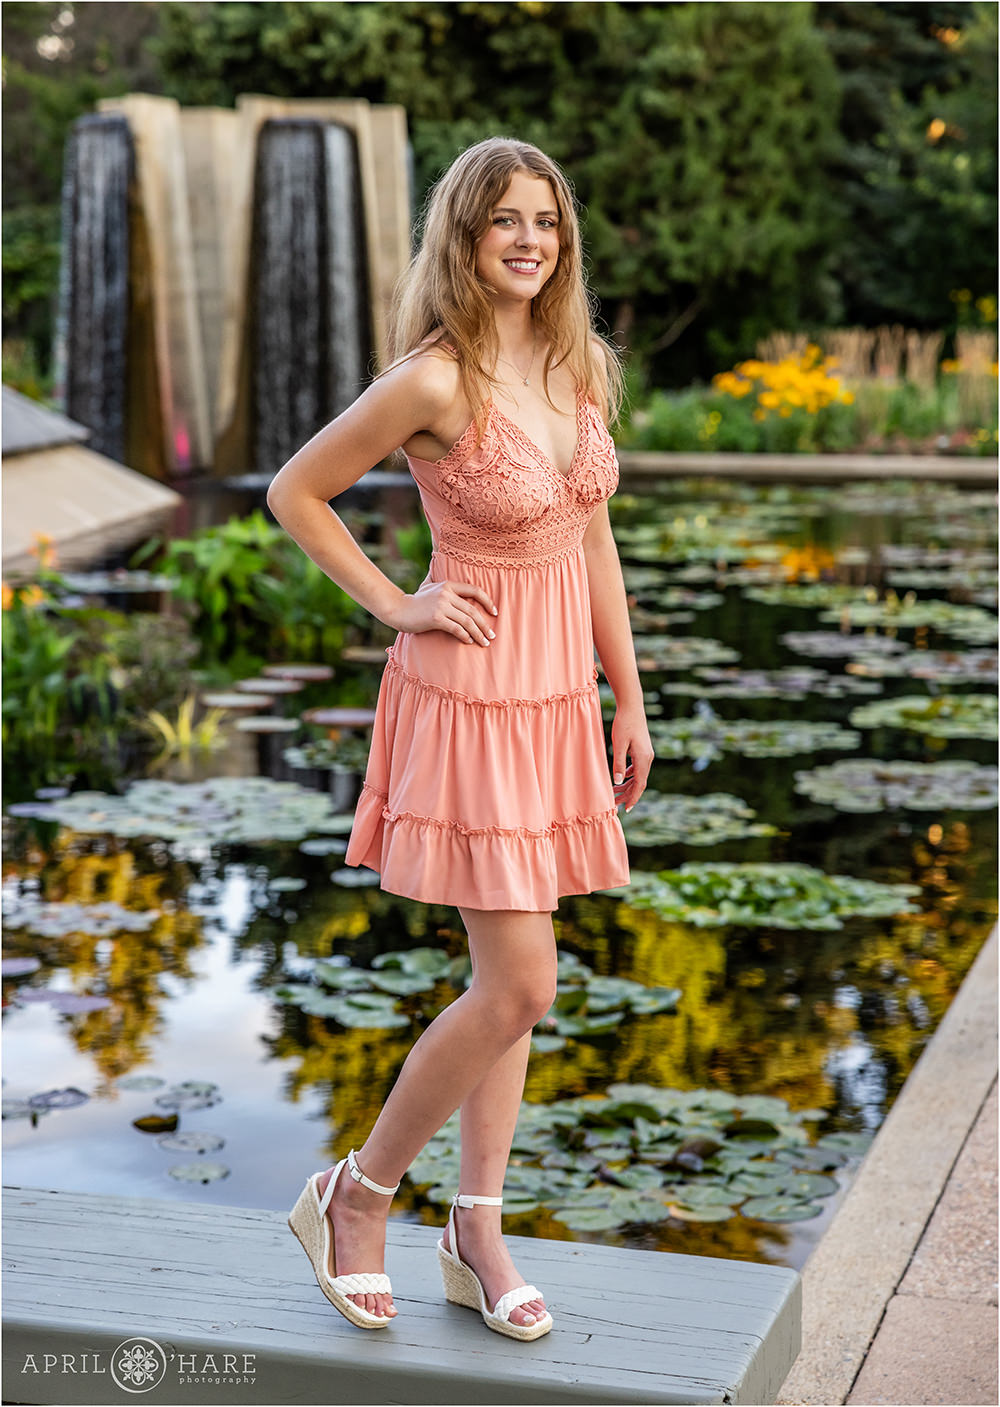 Waterlily garden backdrop with waterfall feature for a Denver Botanic Gardens Senior photoshoot